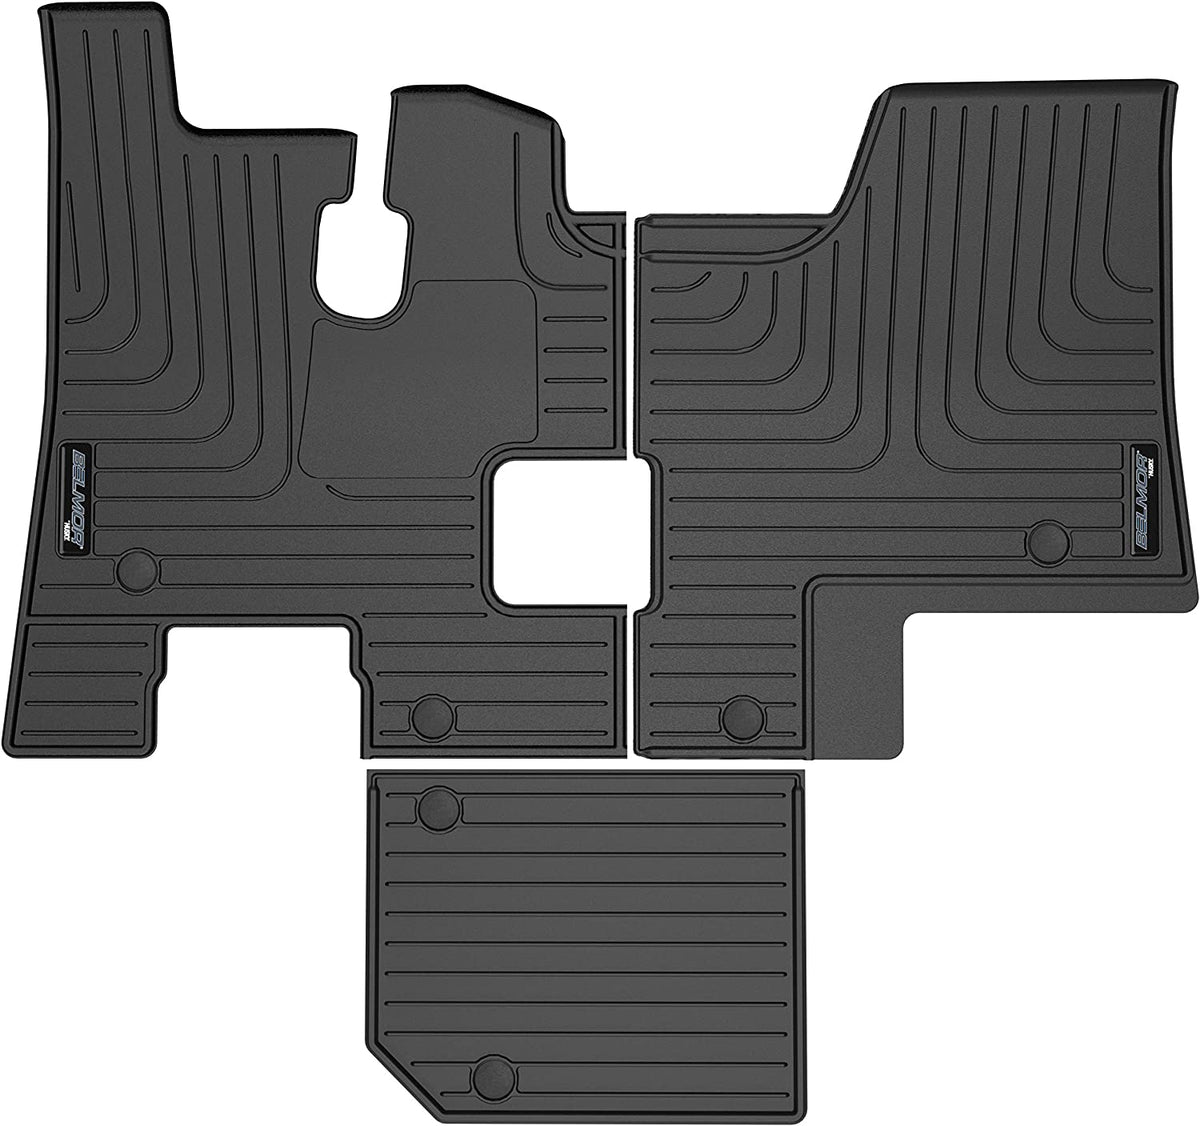 Belmor by Husky Floor Liners Fits 2006-2020 Kenworth W900/W800/T660 for Standard Day Cab, BFM1003M-1